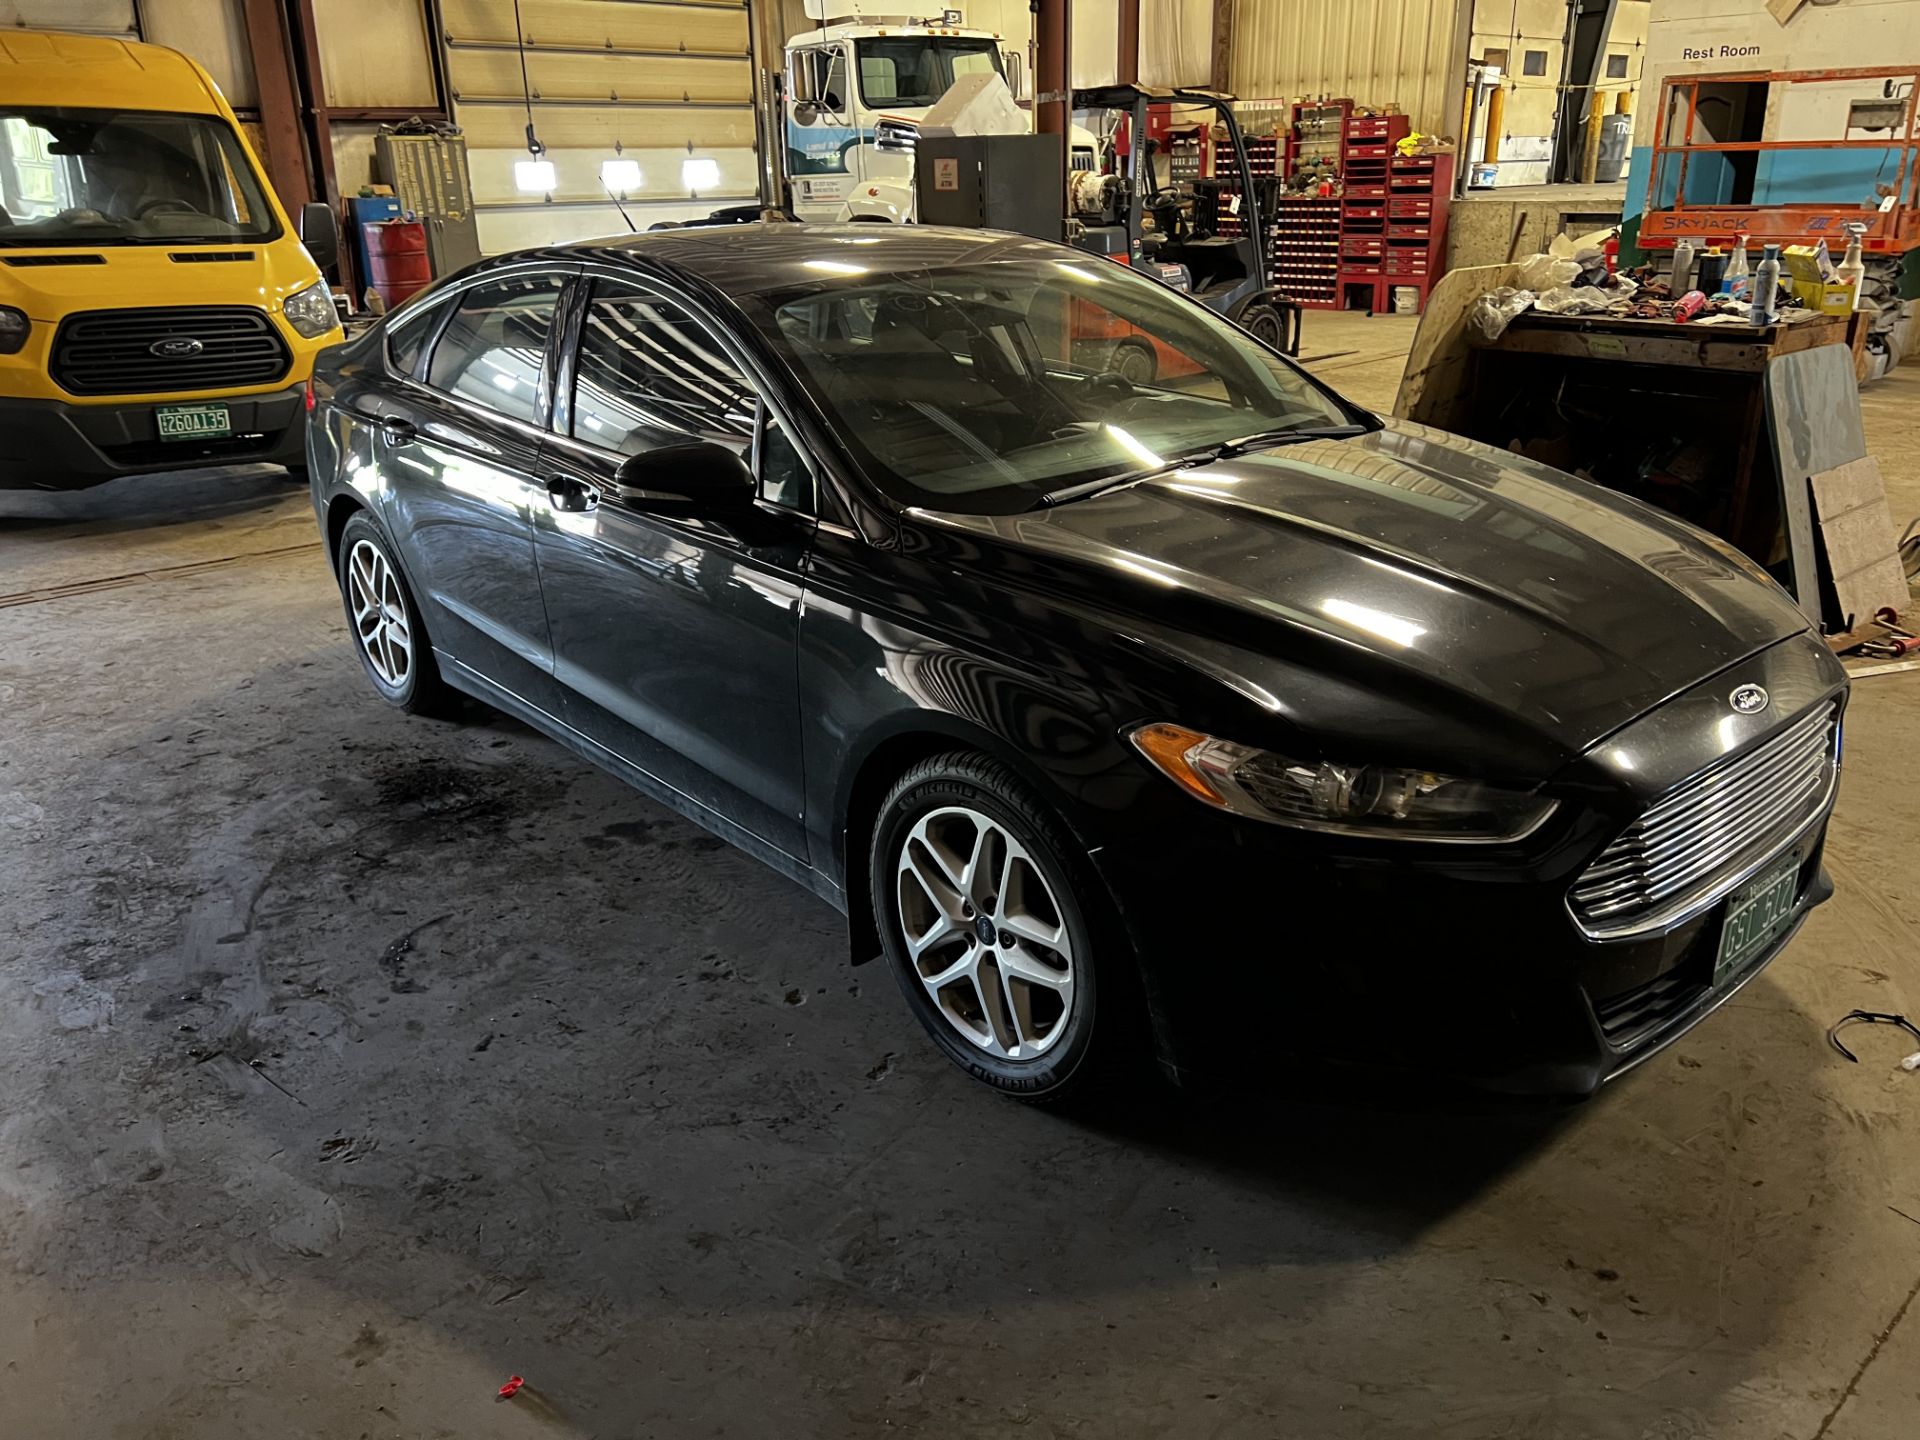 2014 Ford Fusion SE, Auto, A/C, Moonroof, FR Wheel Drive, 4 Cyl, Gas, 2.5 L, (Passenger Outside